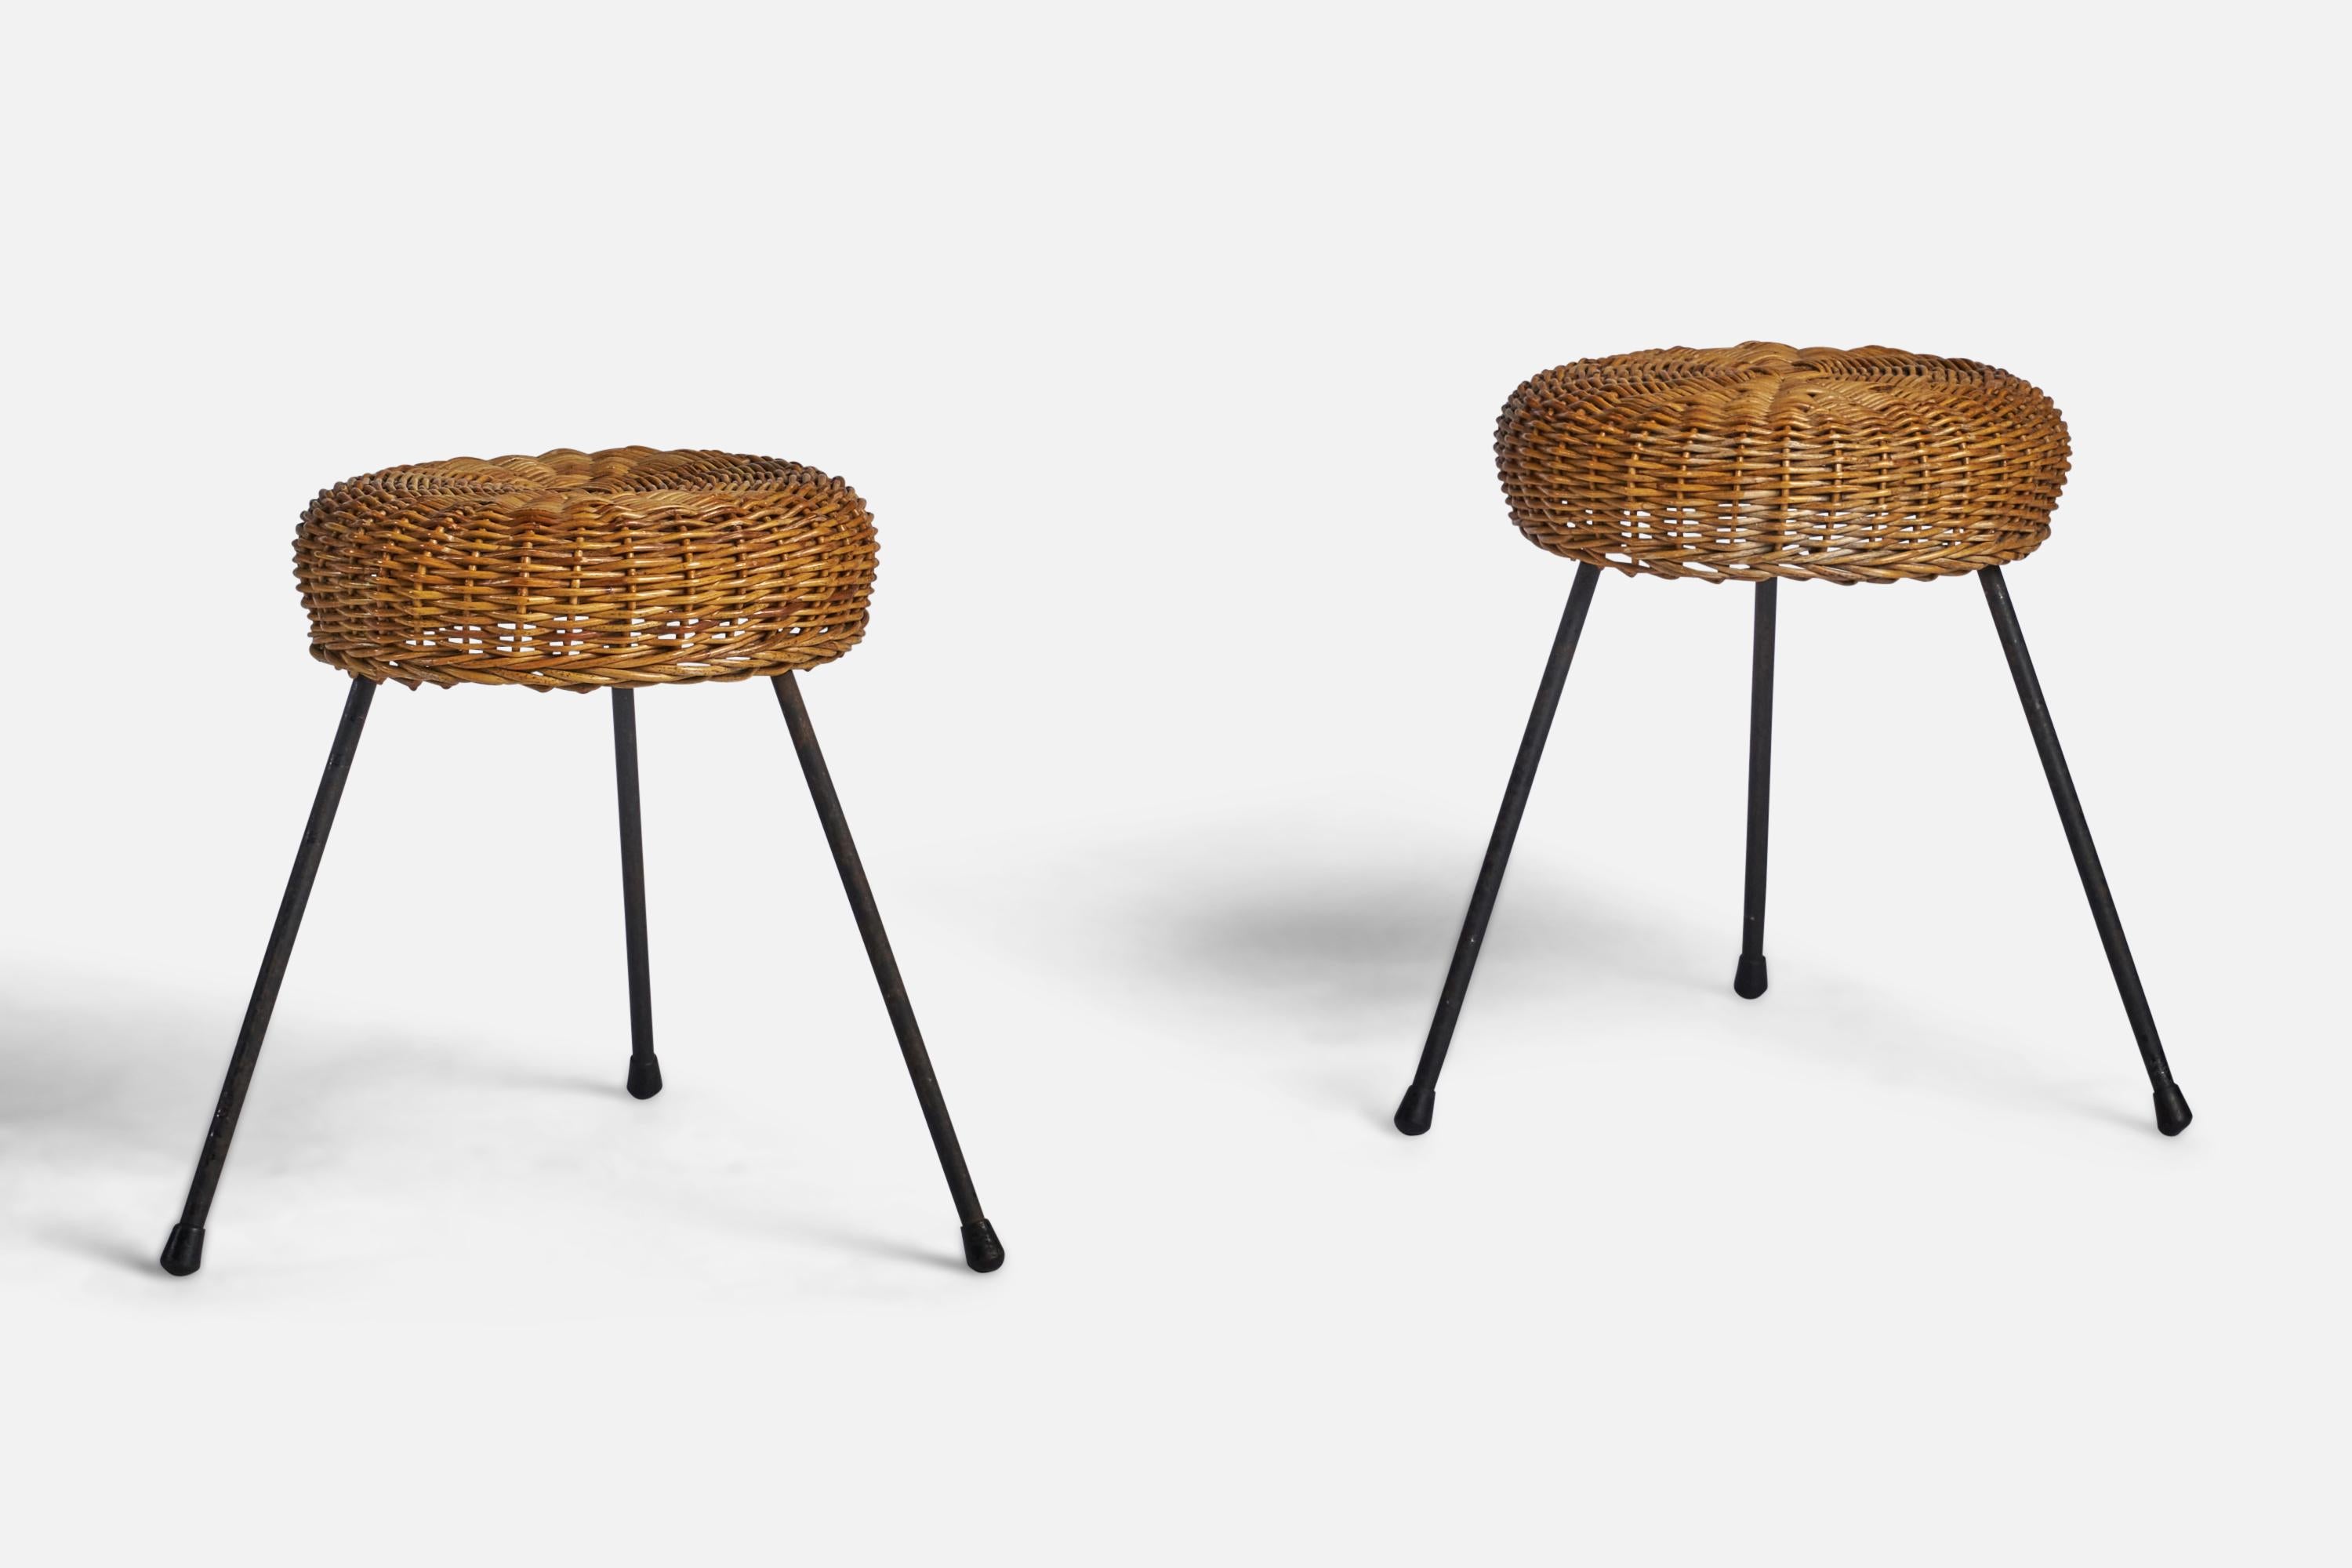 A pair of woven rattan and black-painted iron stools designed and produced in the US, c. 1950s.